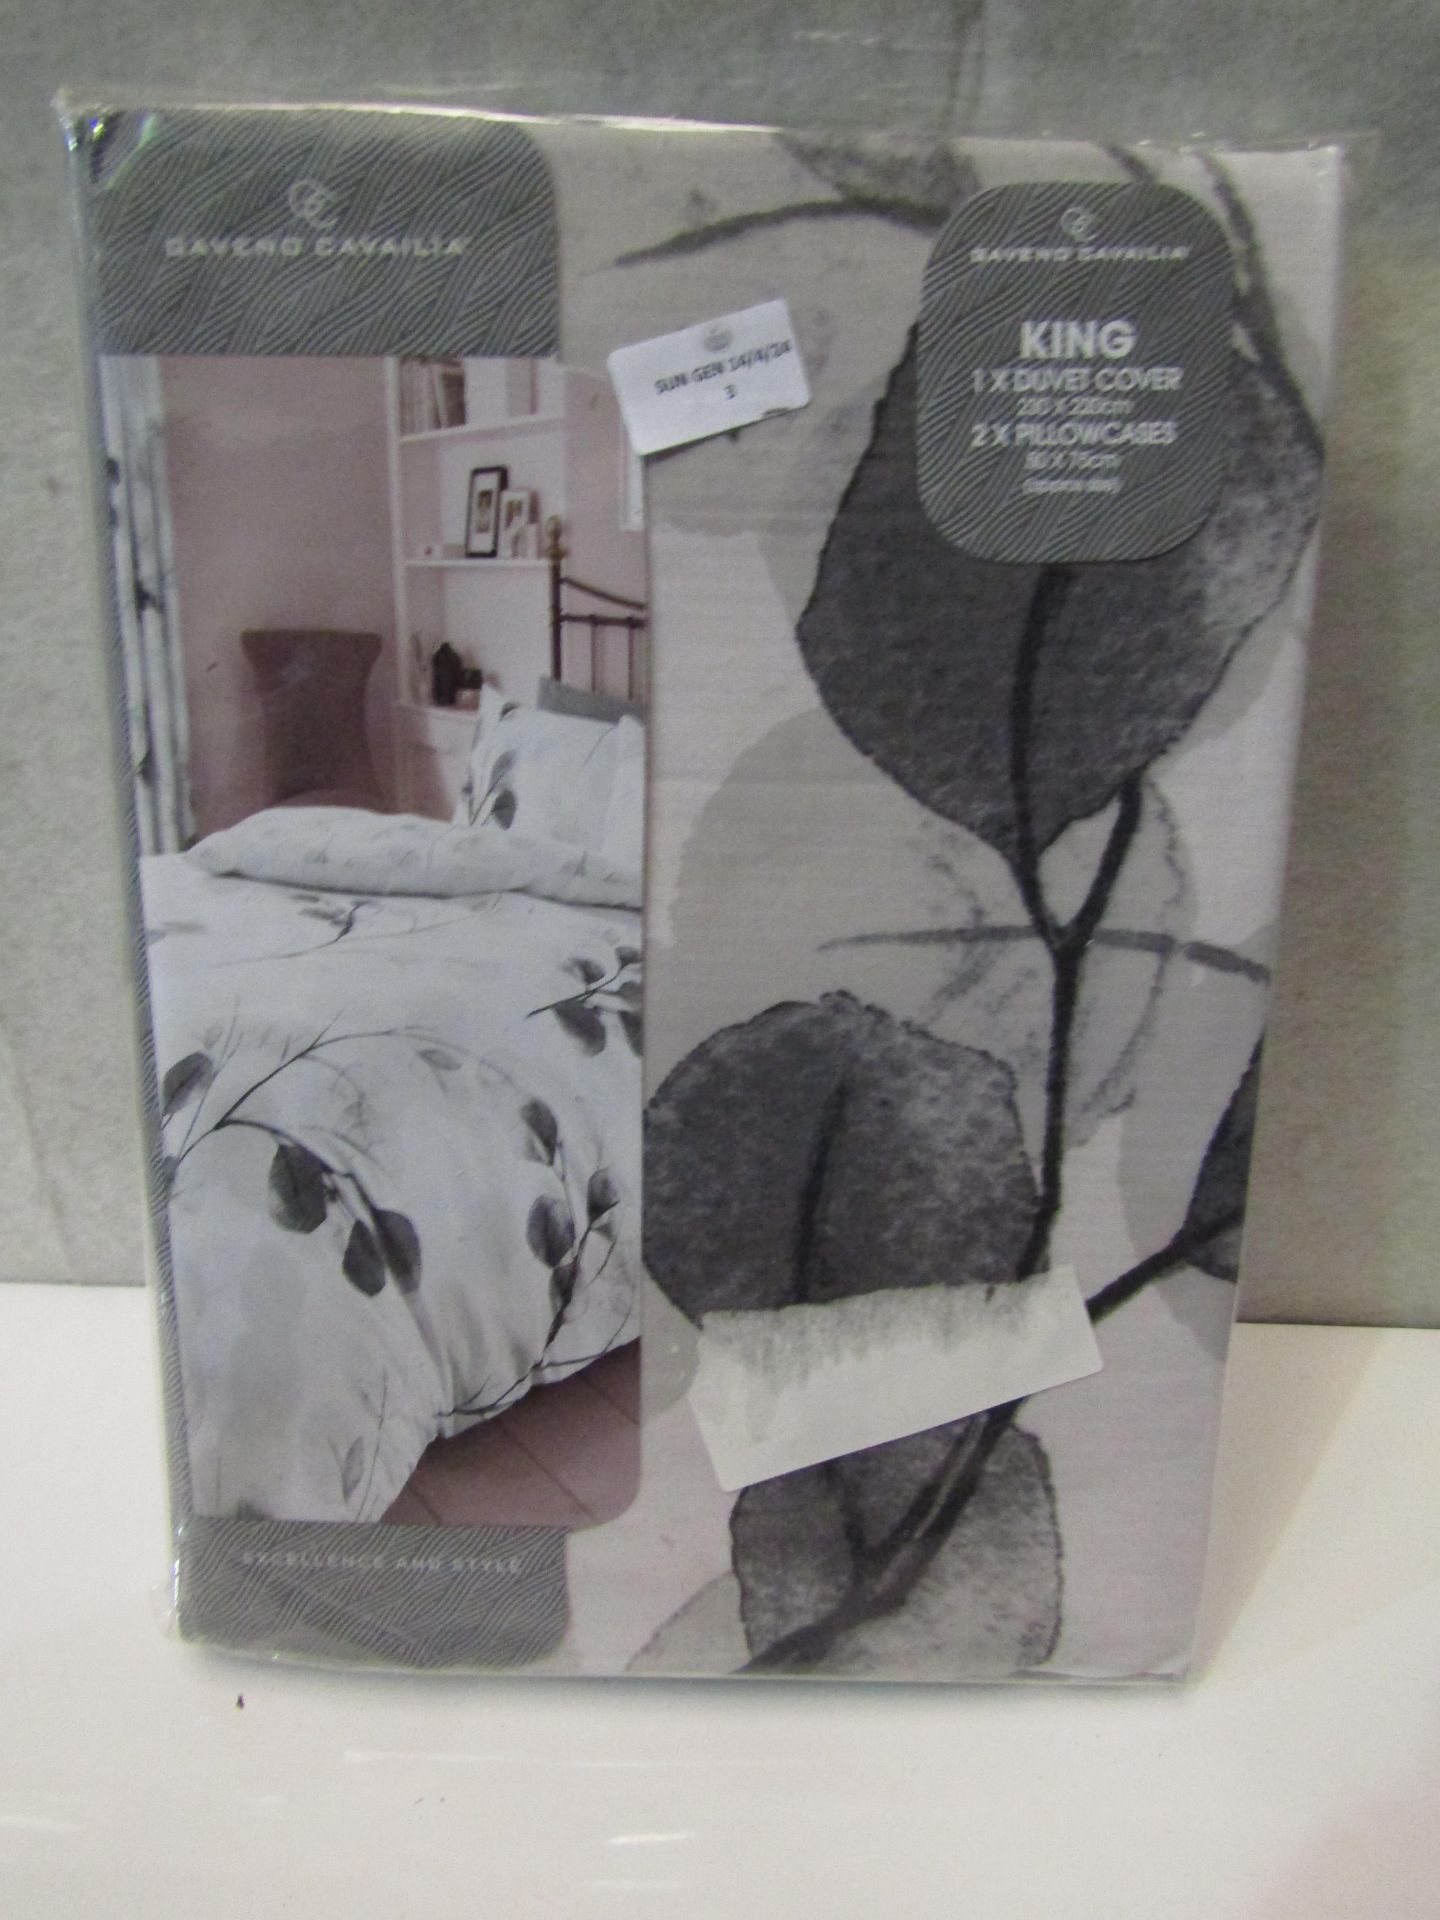 Gaveno Cavailia Duvet Set King - Unchecked & Packaged, Please See Image For Design.